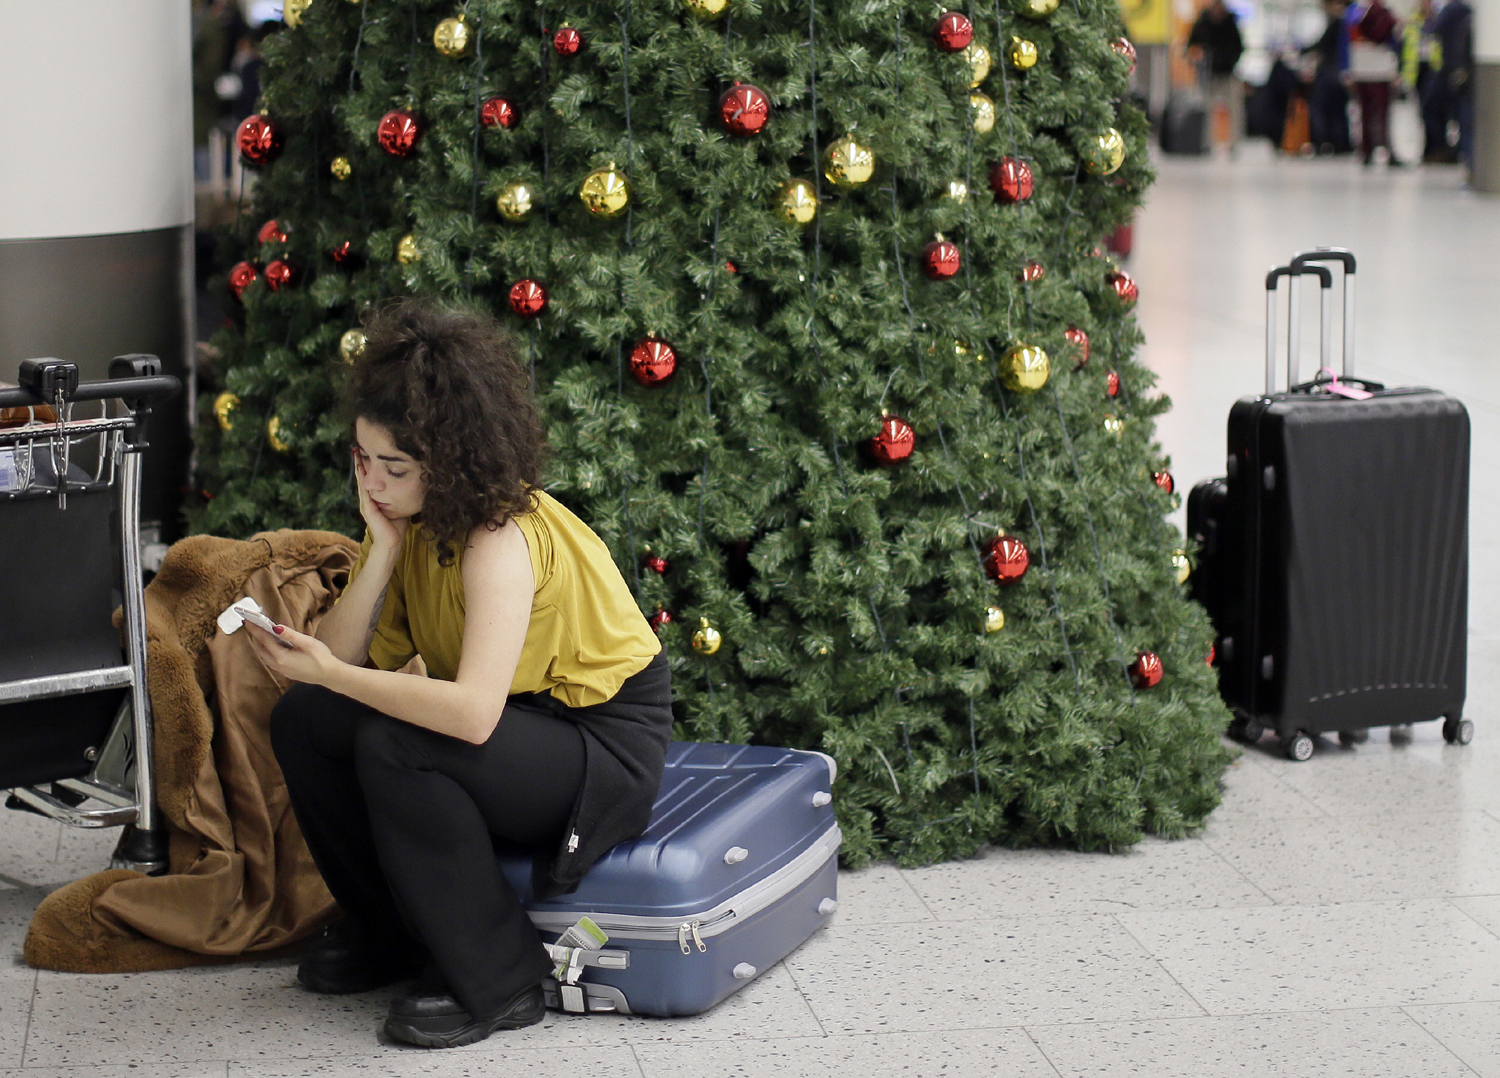 A woman waits in the departures area at Gatwick airport, near London, as the airport remains closed with incoming flights delayed or diverted to other airports, after drones were spotted over the airfield last night and this morning, Thursday, Dec. 20, 2018.[Photo: AP/Tim Ireland]